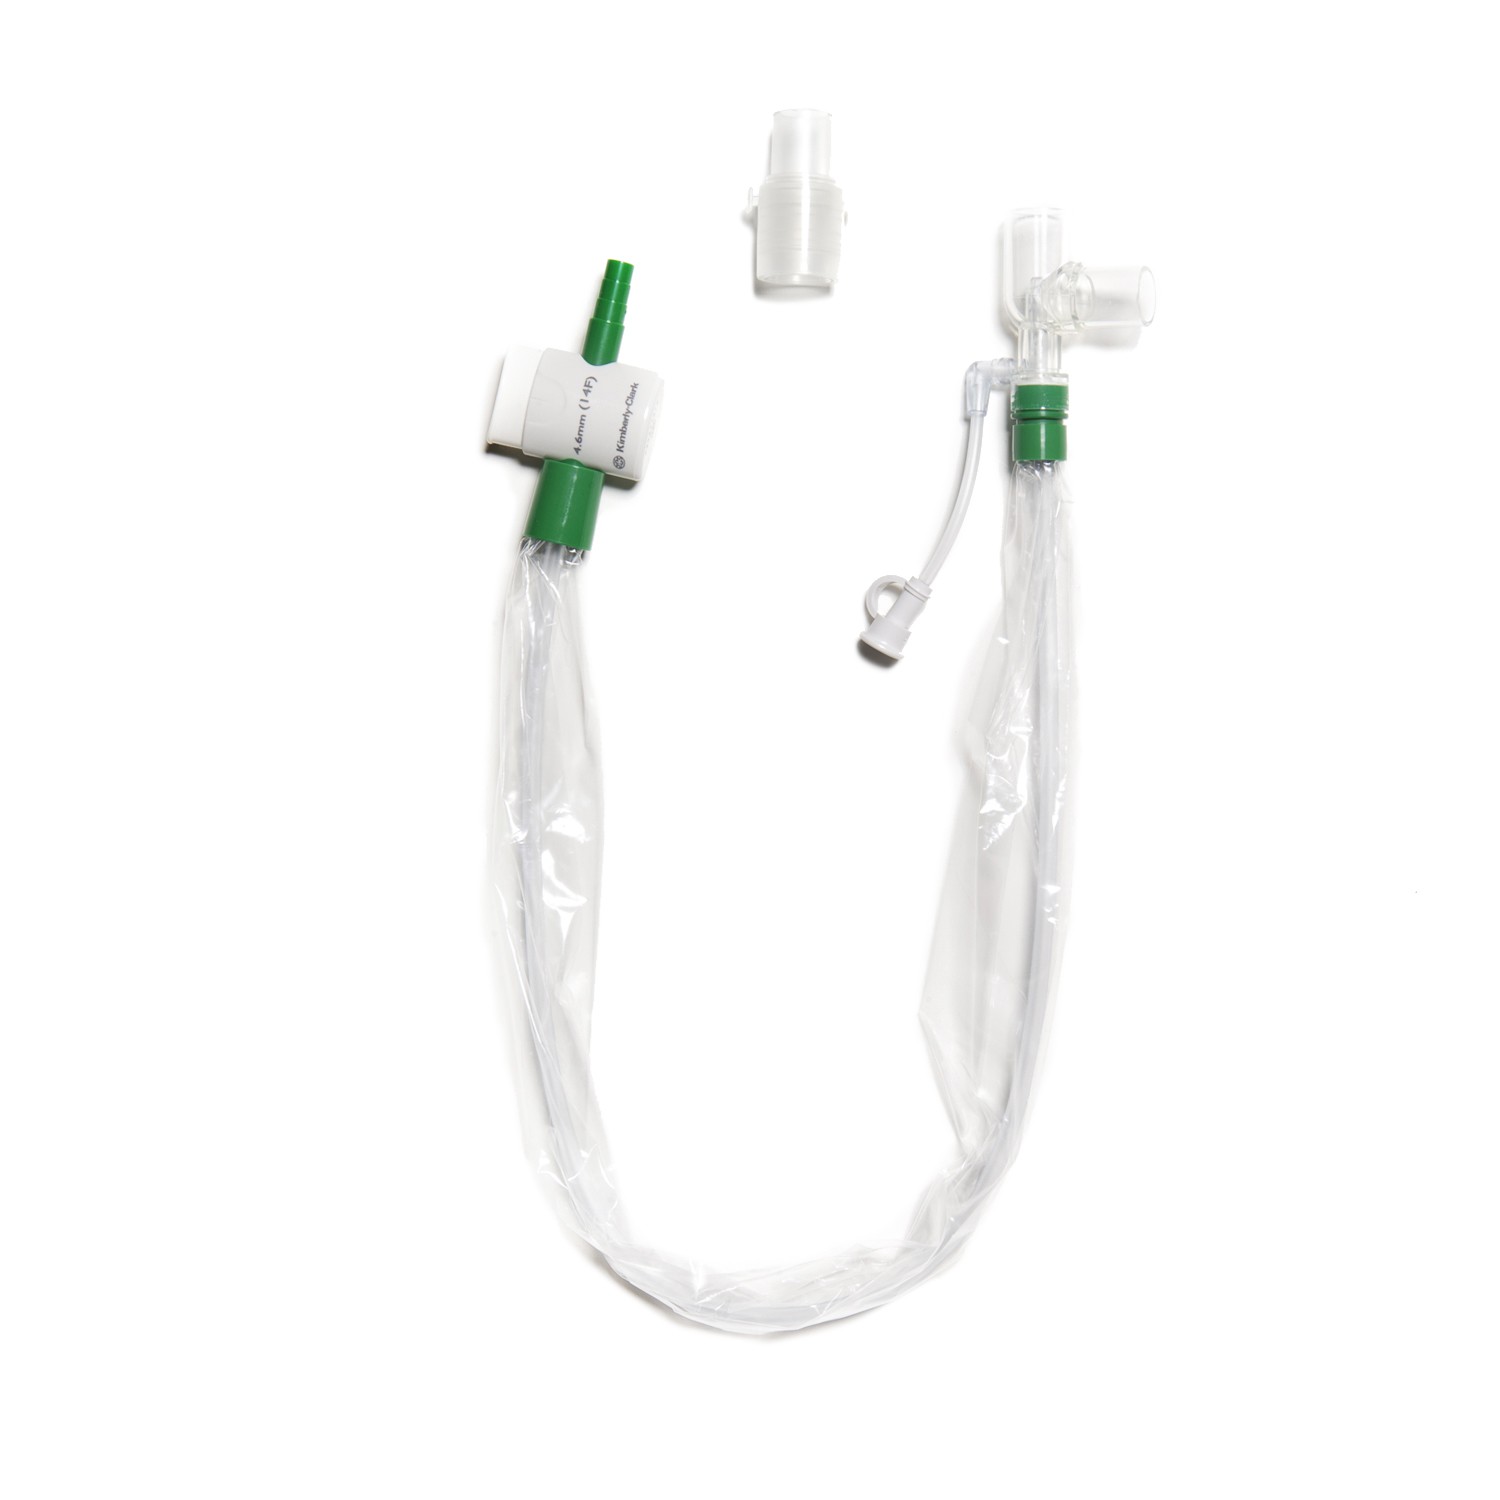 CLOSED SUCTION CATHETER FOR 72 HOURS